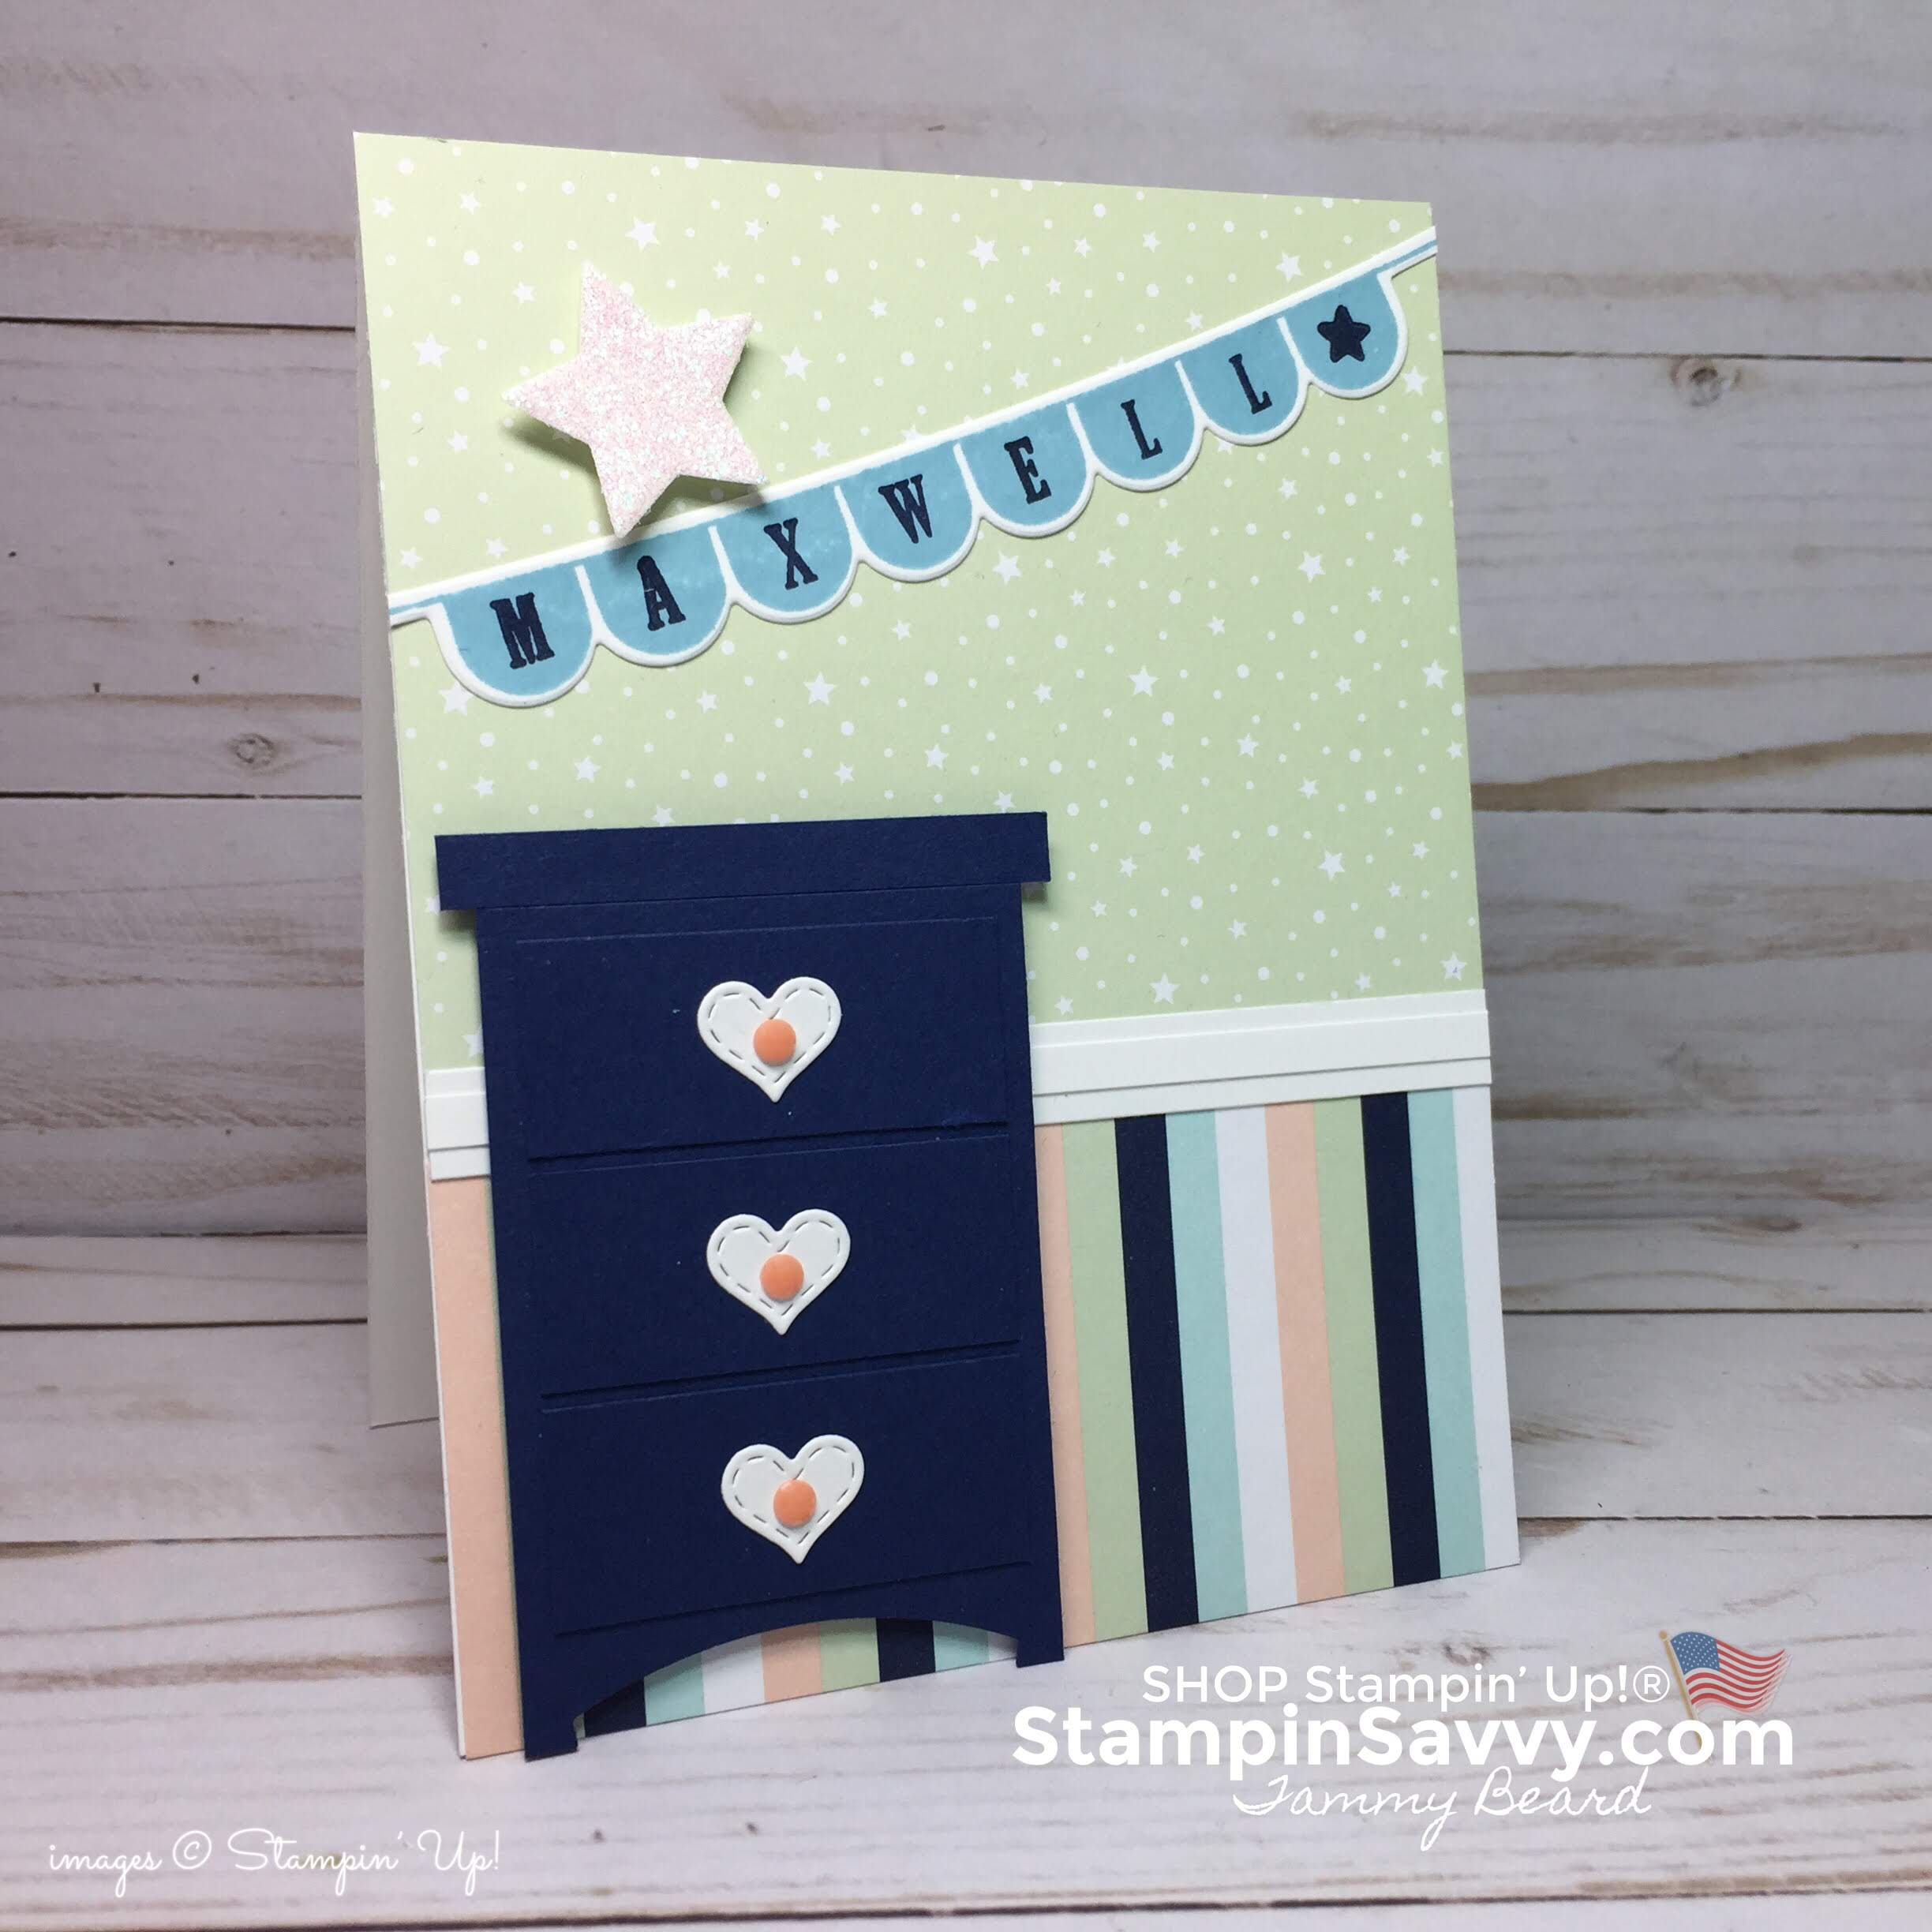 Stampin Up Boy Birthday Card Ideas Stampin Up Ba Boy Card Idea Welcome Max Stampin Savvy